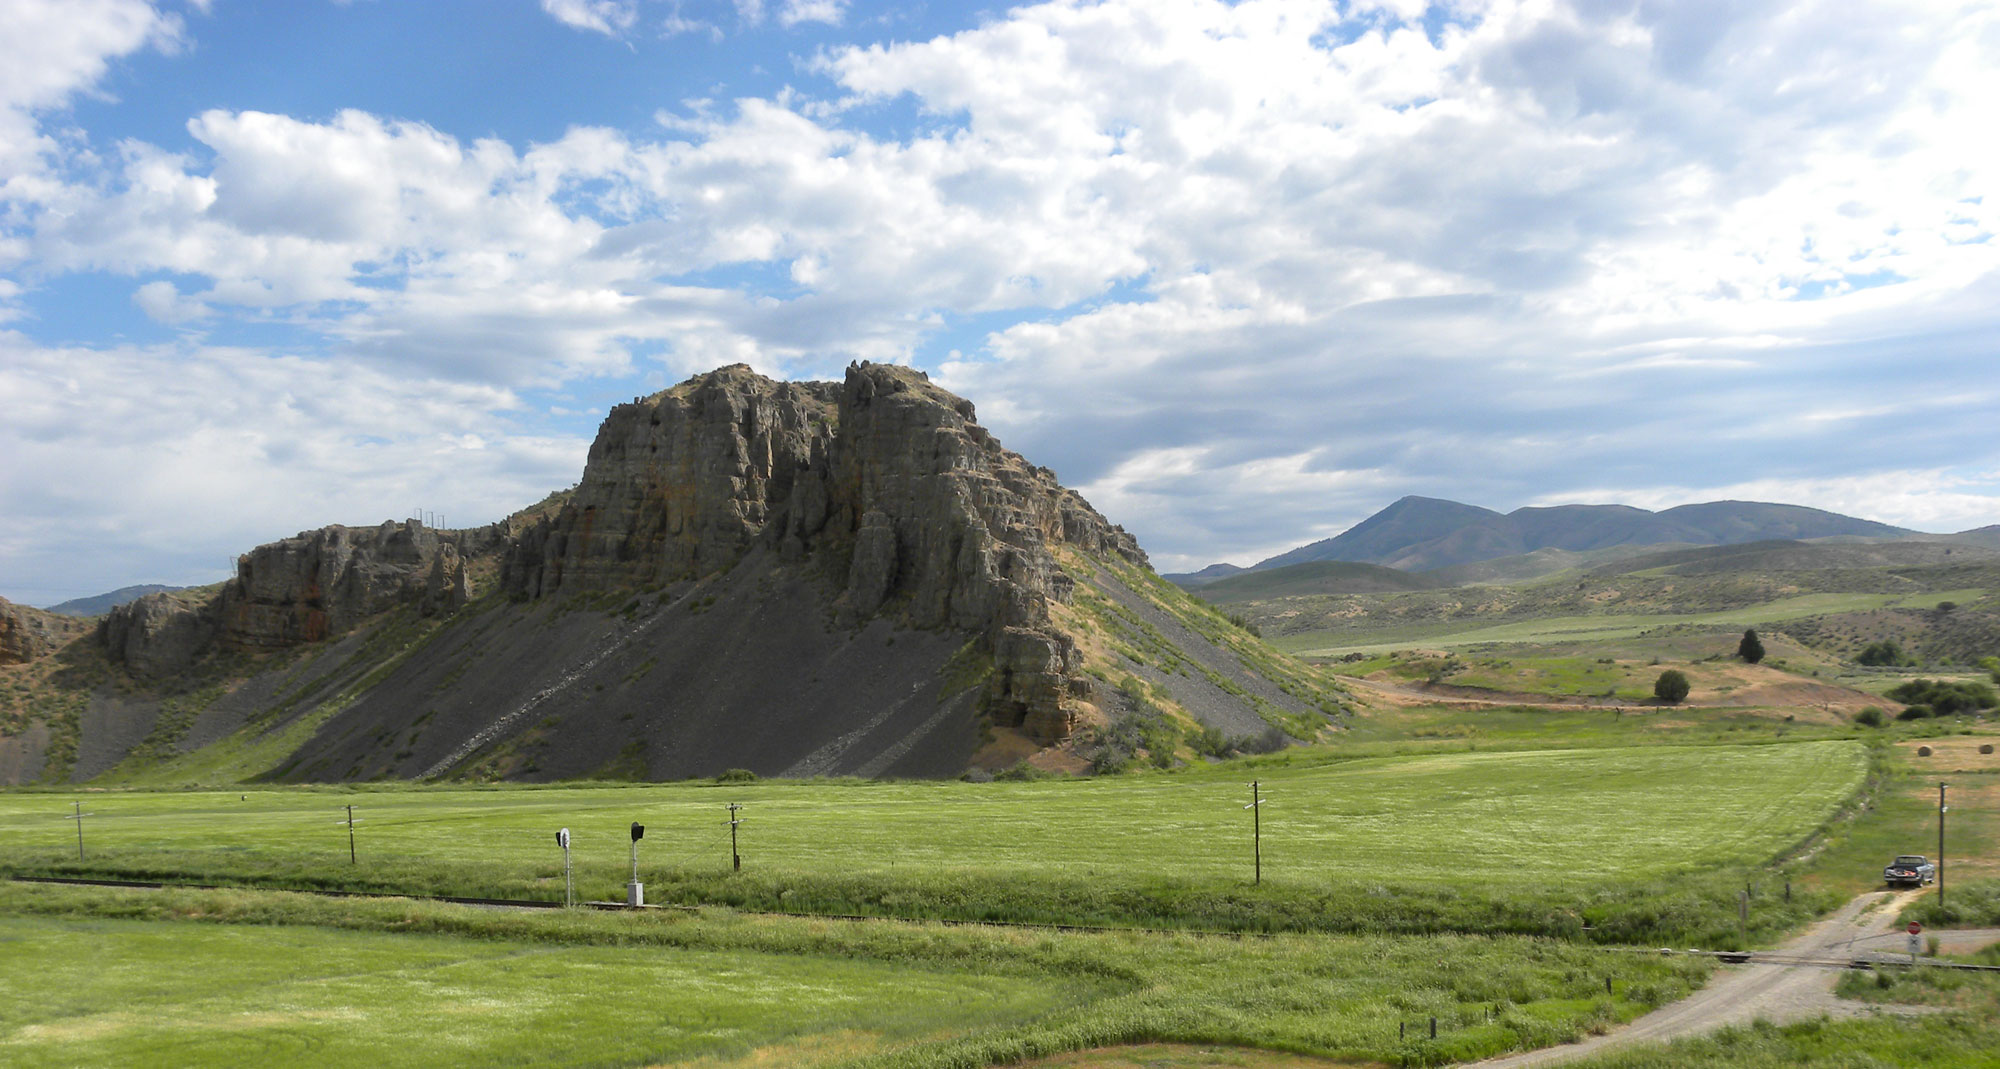 Photograph of Red Rock Pass, Idaho. The photo shows a rock formation rising in the middle of a flat green field. More low hills rise in the background. A gravel road can be seen in the lower right corner of the image.